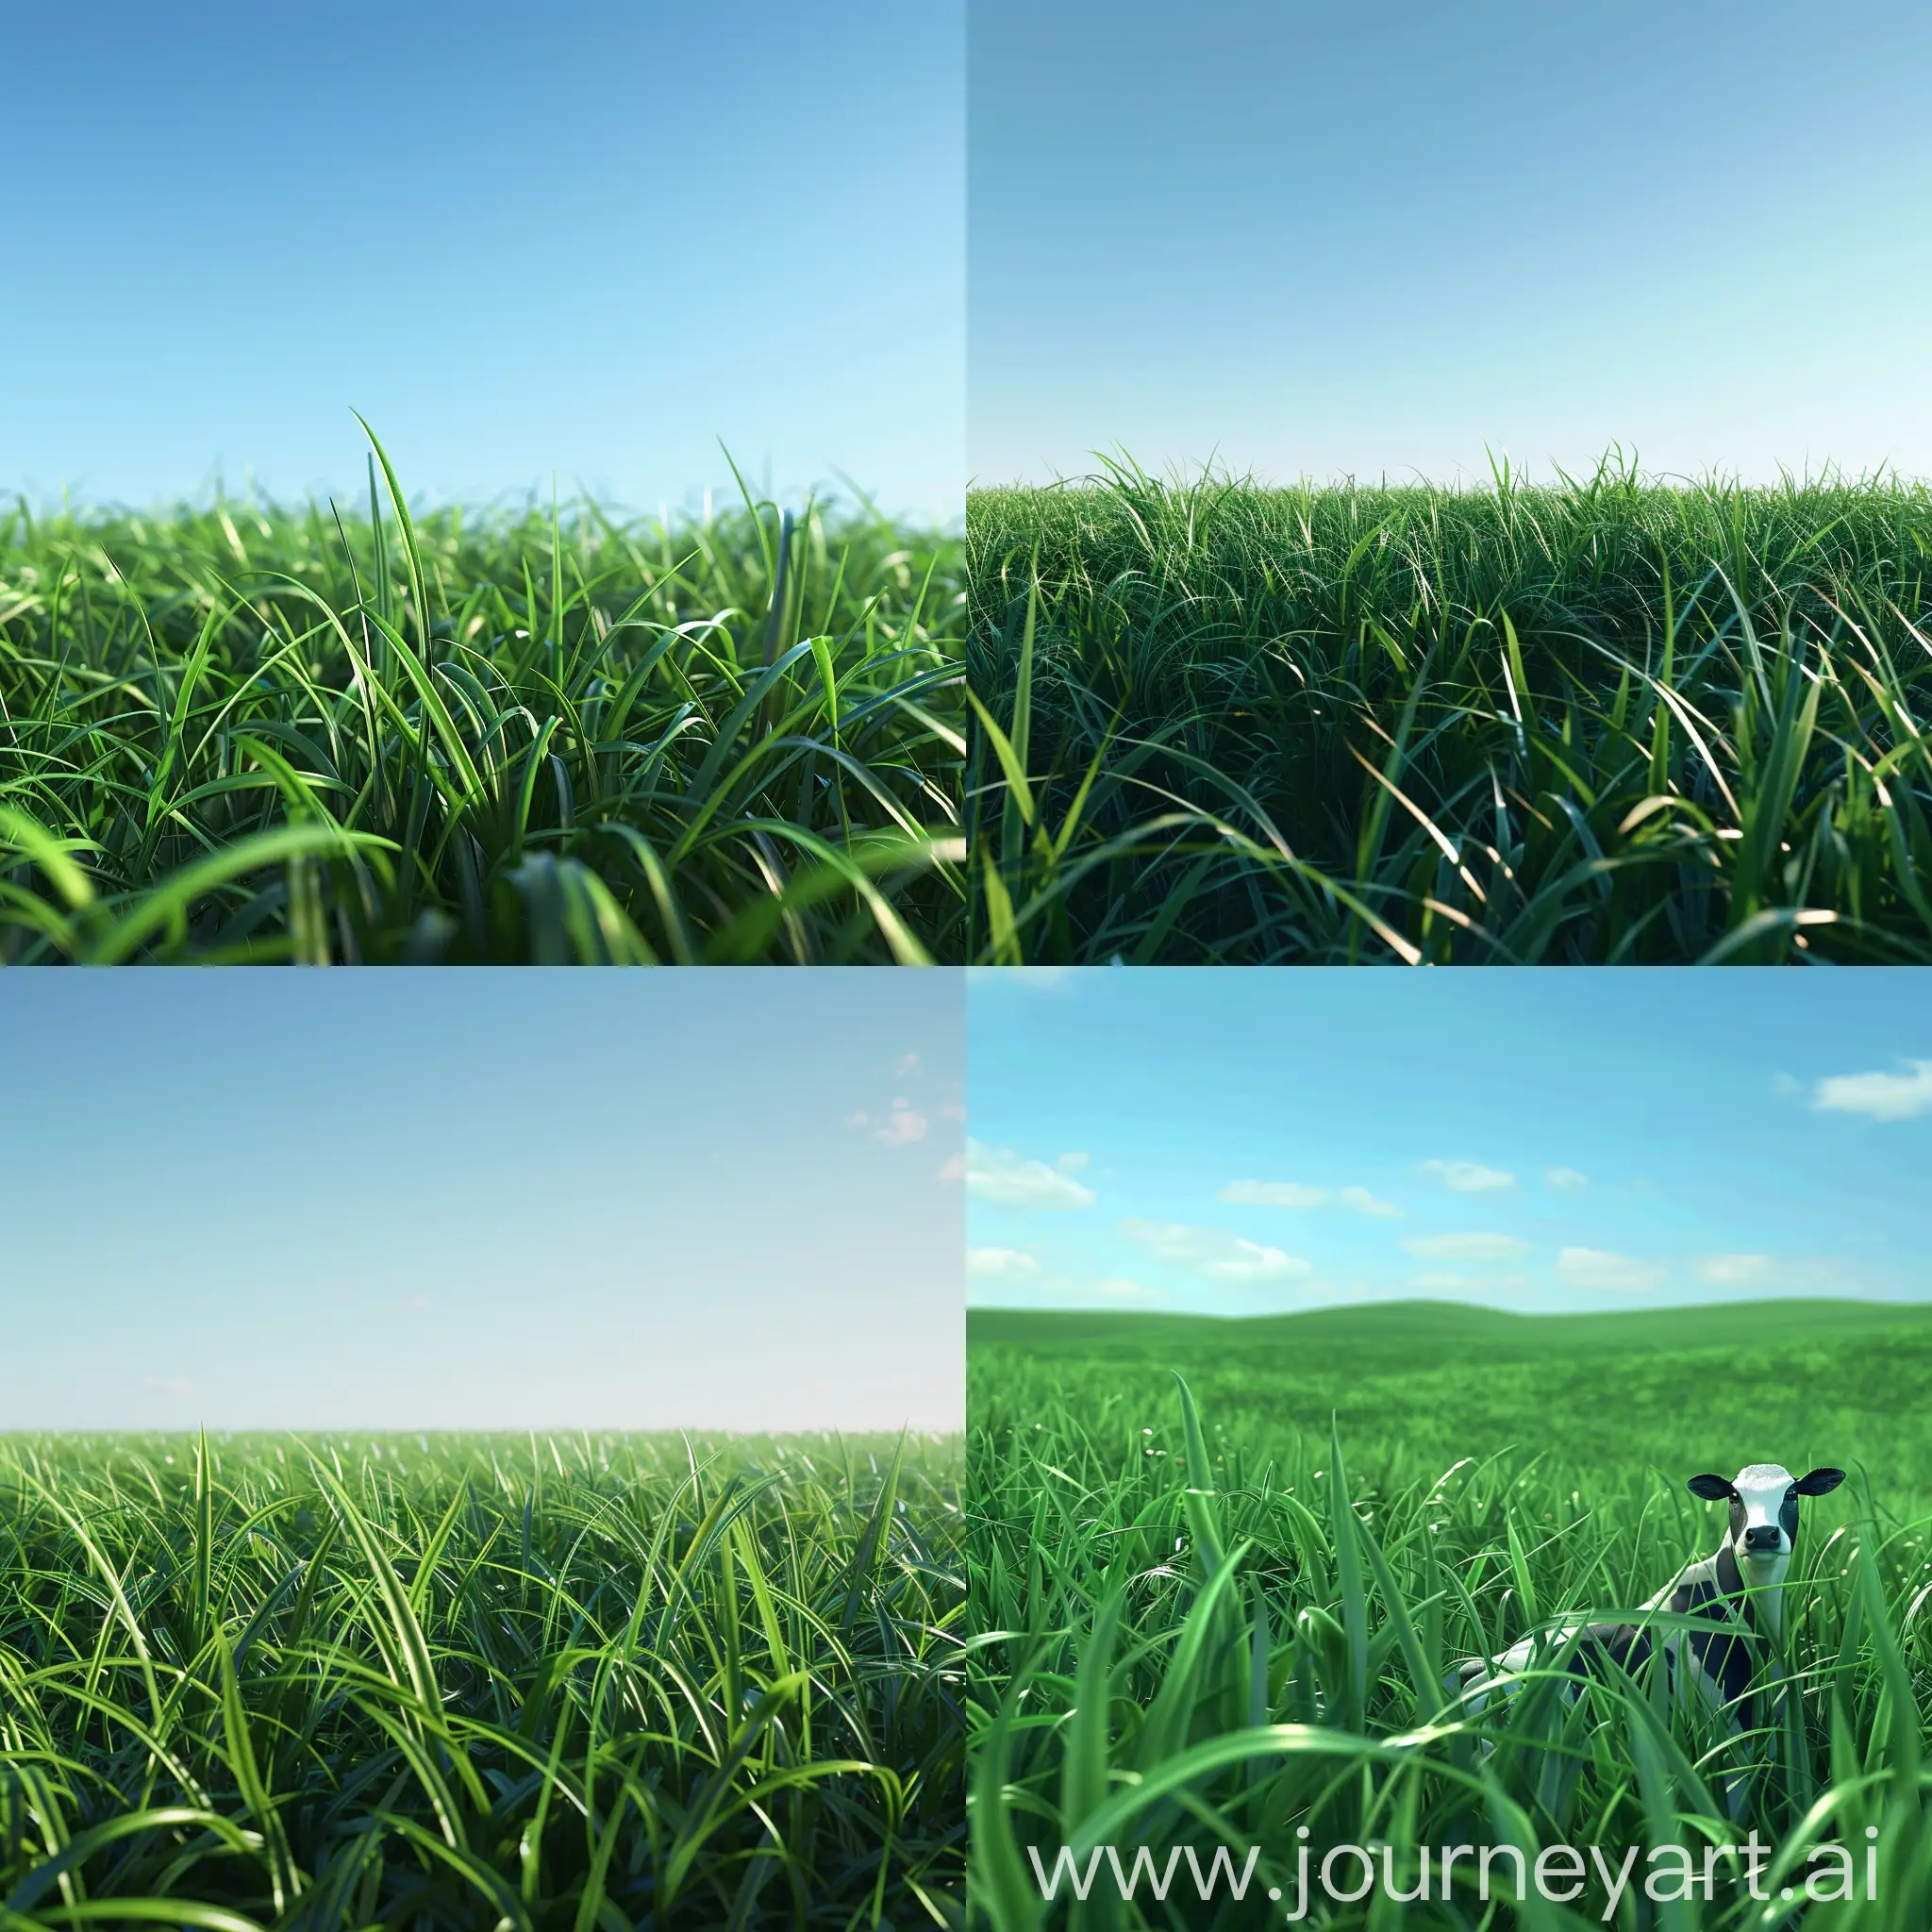 Create a photorealistic image with a natural grassland background in France, The scene should showcase lush green grass stretching into the distance, under a clear blue sky that radiates brightness and warmth. capturing the beauty and tranquility of the landscape as a high-quality milk source land.